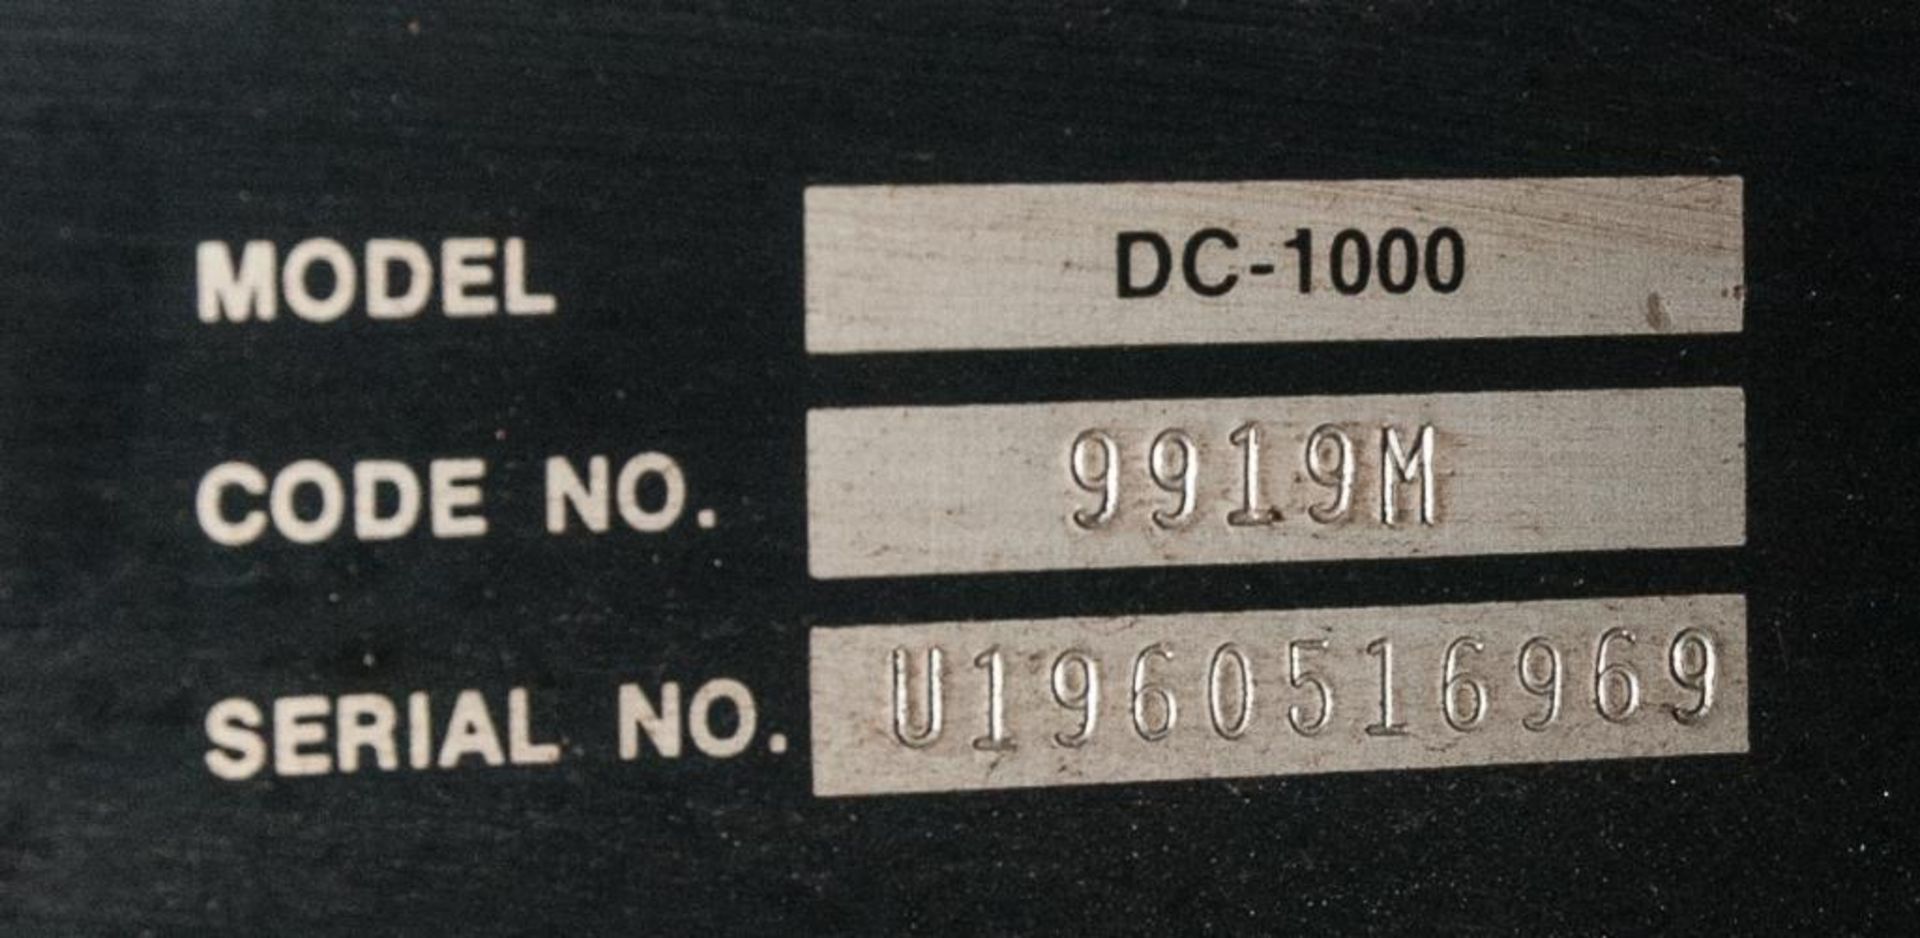 Lincoln IdealArc DC1000, DC Arc Welder, s/n U1960516969, 230/460v, On Cart, 100% Duty Cycle, Rated O - Image 3 of 3